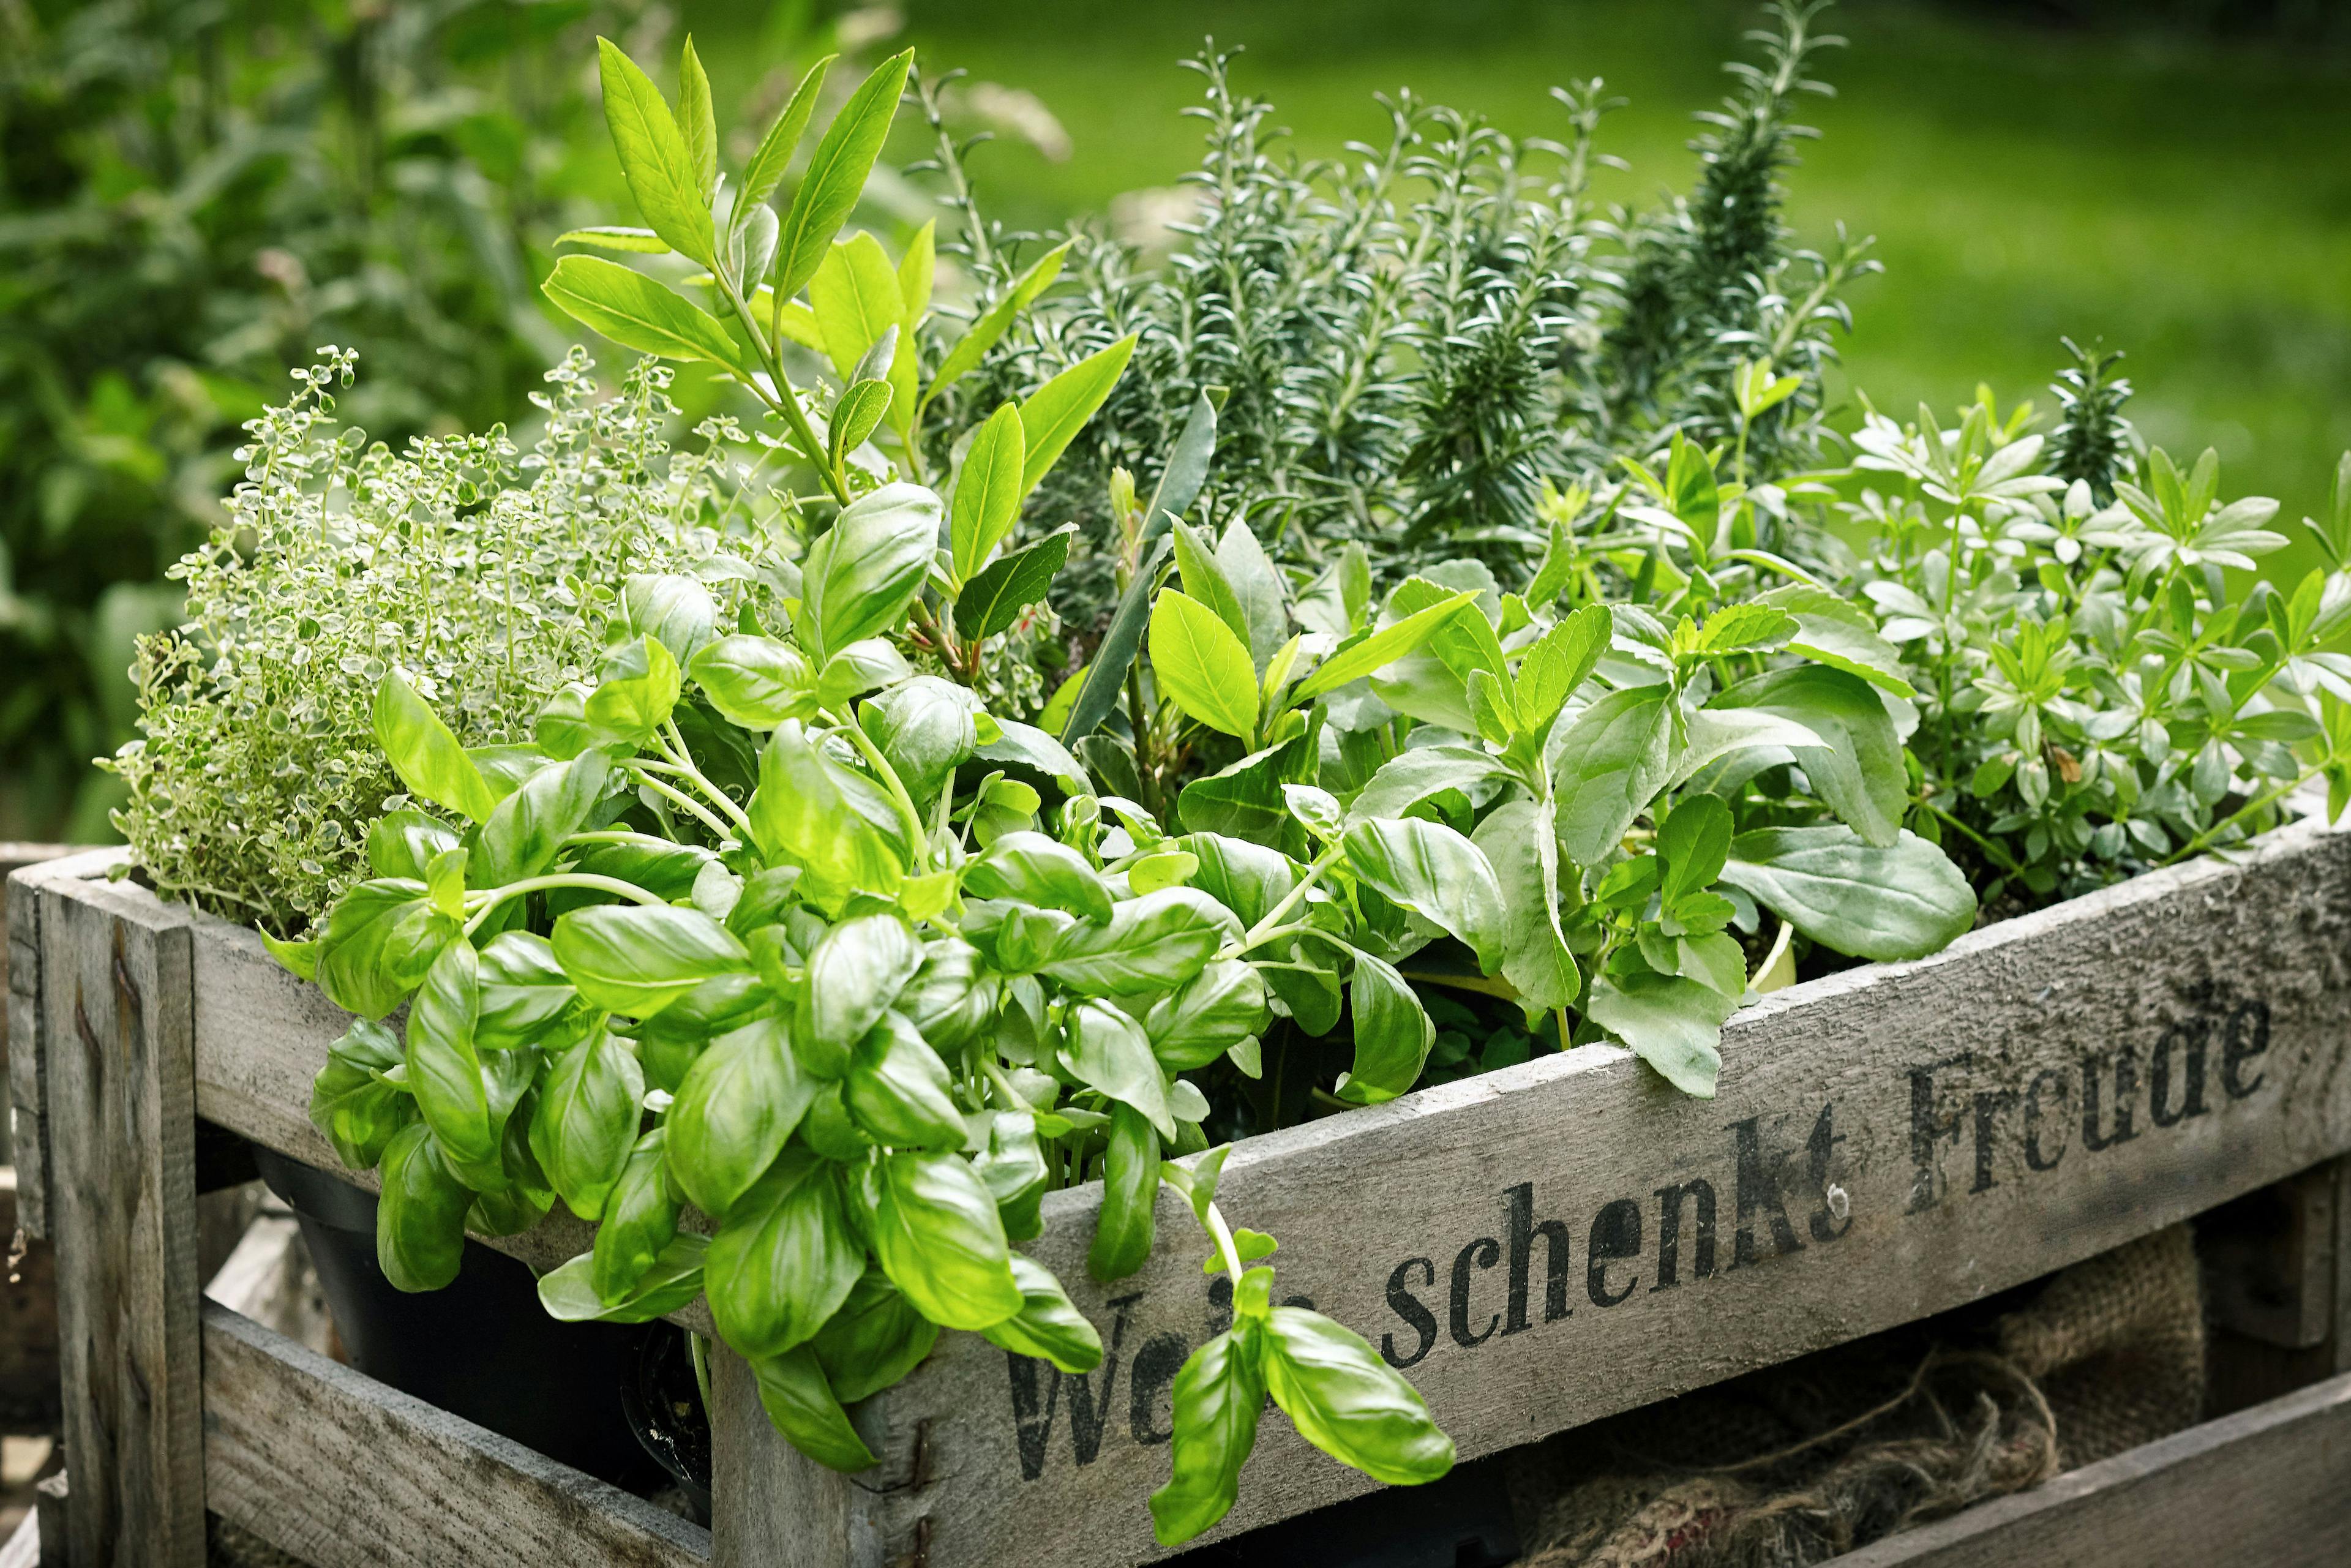 Wooden crate with variety of potted culinary herbs | Image Credit: © exclusive-design - stock.adobe.com